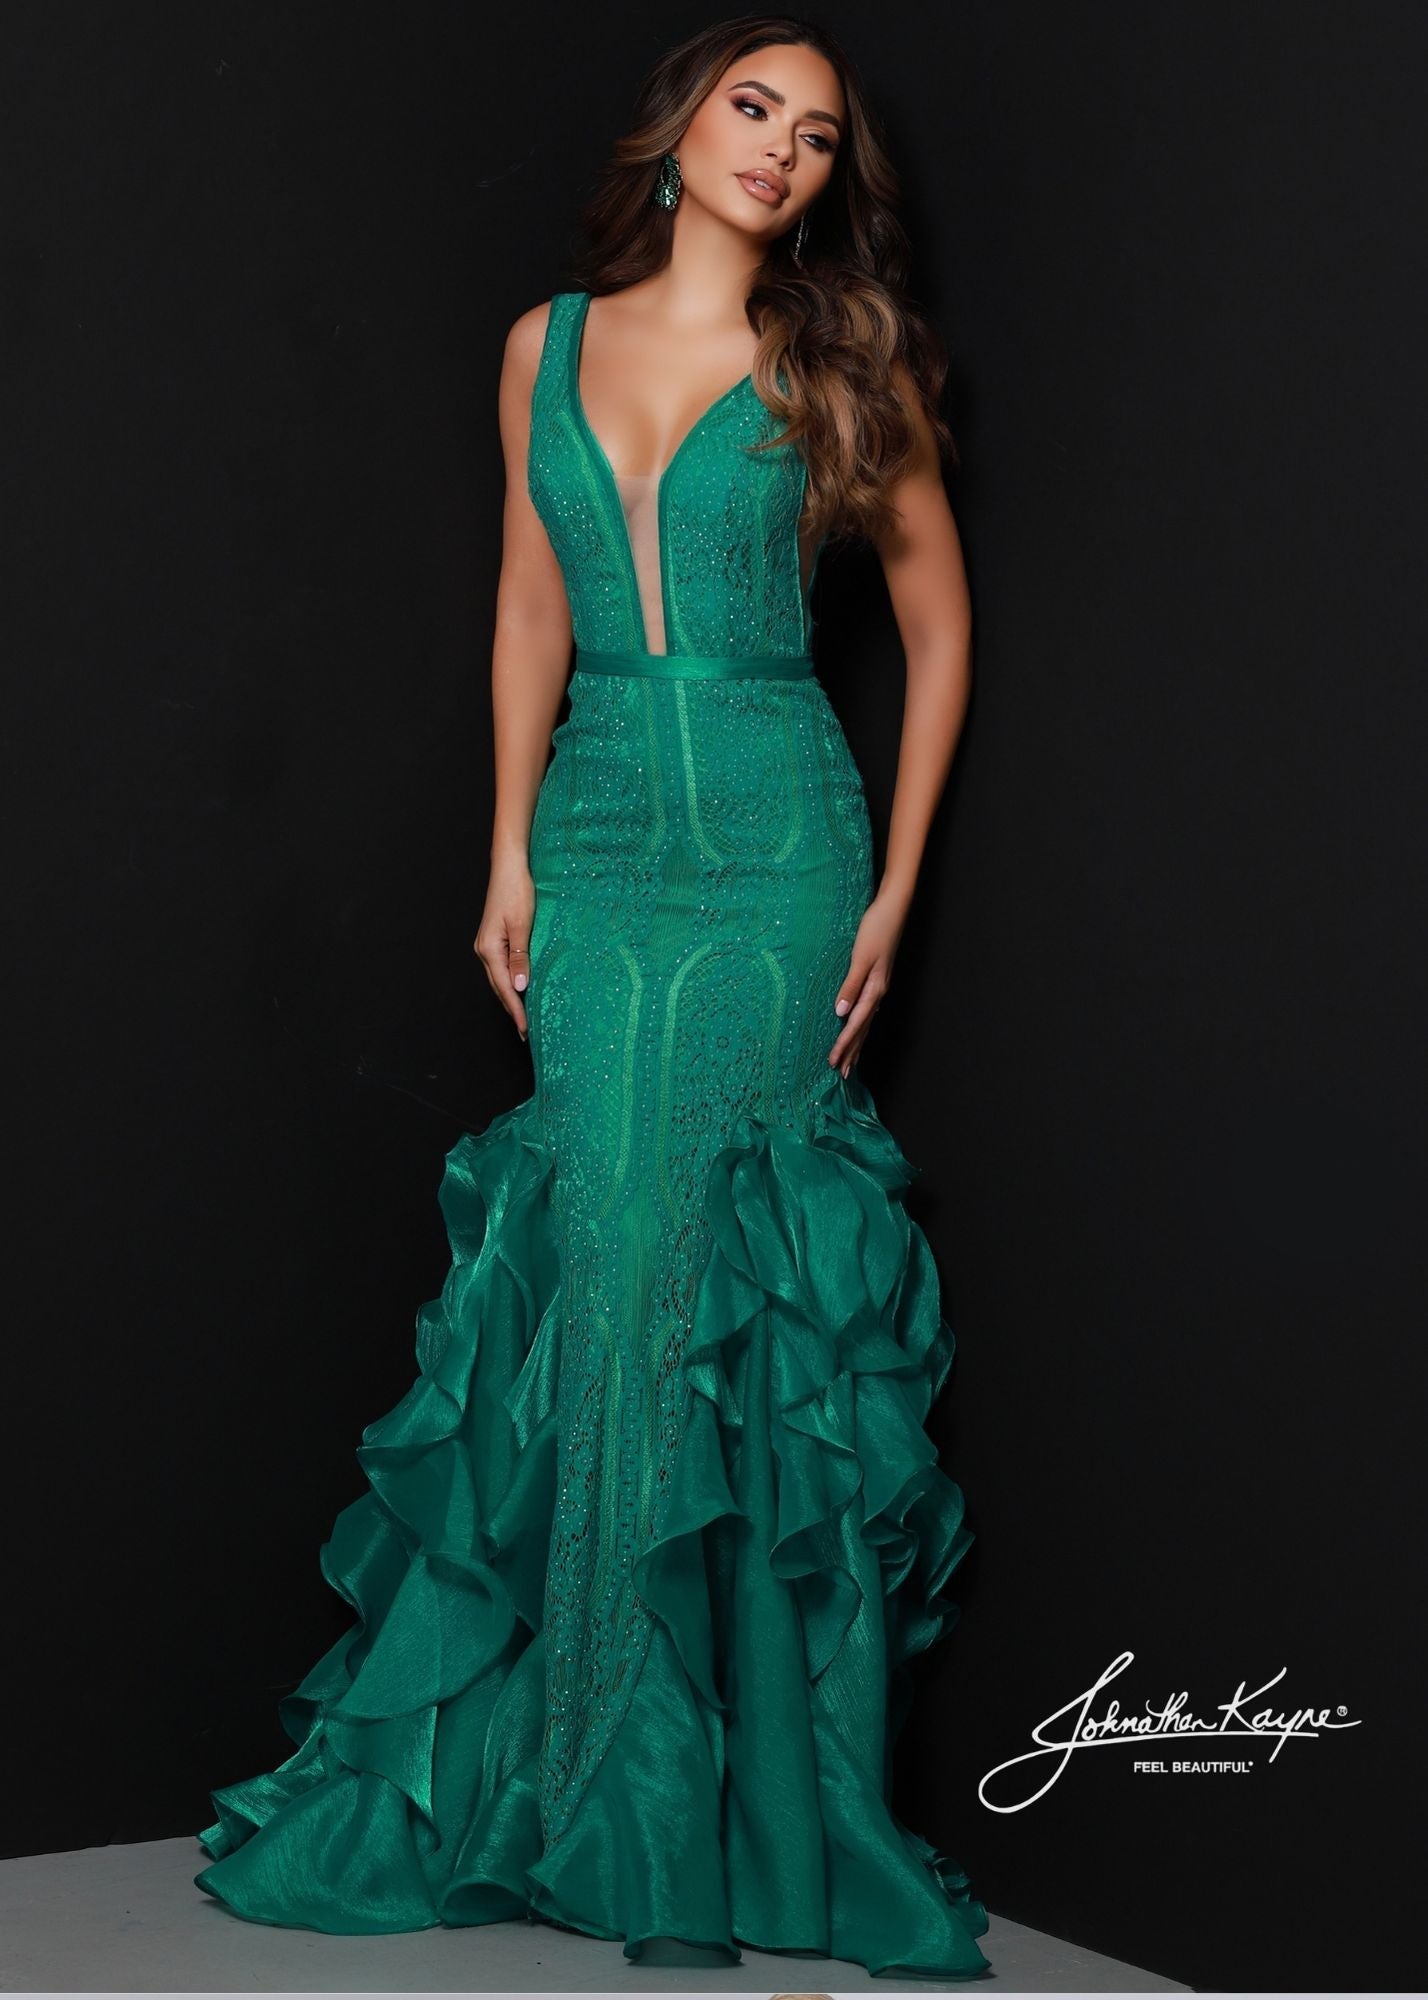 Johnathan Kayne 2542 Long Lace Ruffle Mermaid Prom Dress Pageant Gown V Neck Formal. A whimsical dream come true with this classic mermaid silhouette. The deep plunge neckline accentuates the curves and tonal stones give a touch of sparkle.  Colors: Aqua, Jade, Black, White  Sizes: 00, 0, 2, 4, 6, 8, 10, 12, 14, 16  Fabric Lace, Stretch Lining, Poly Organza